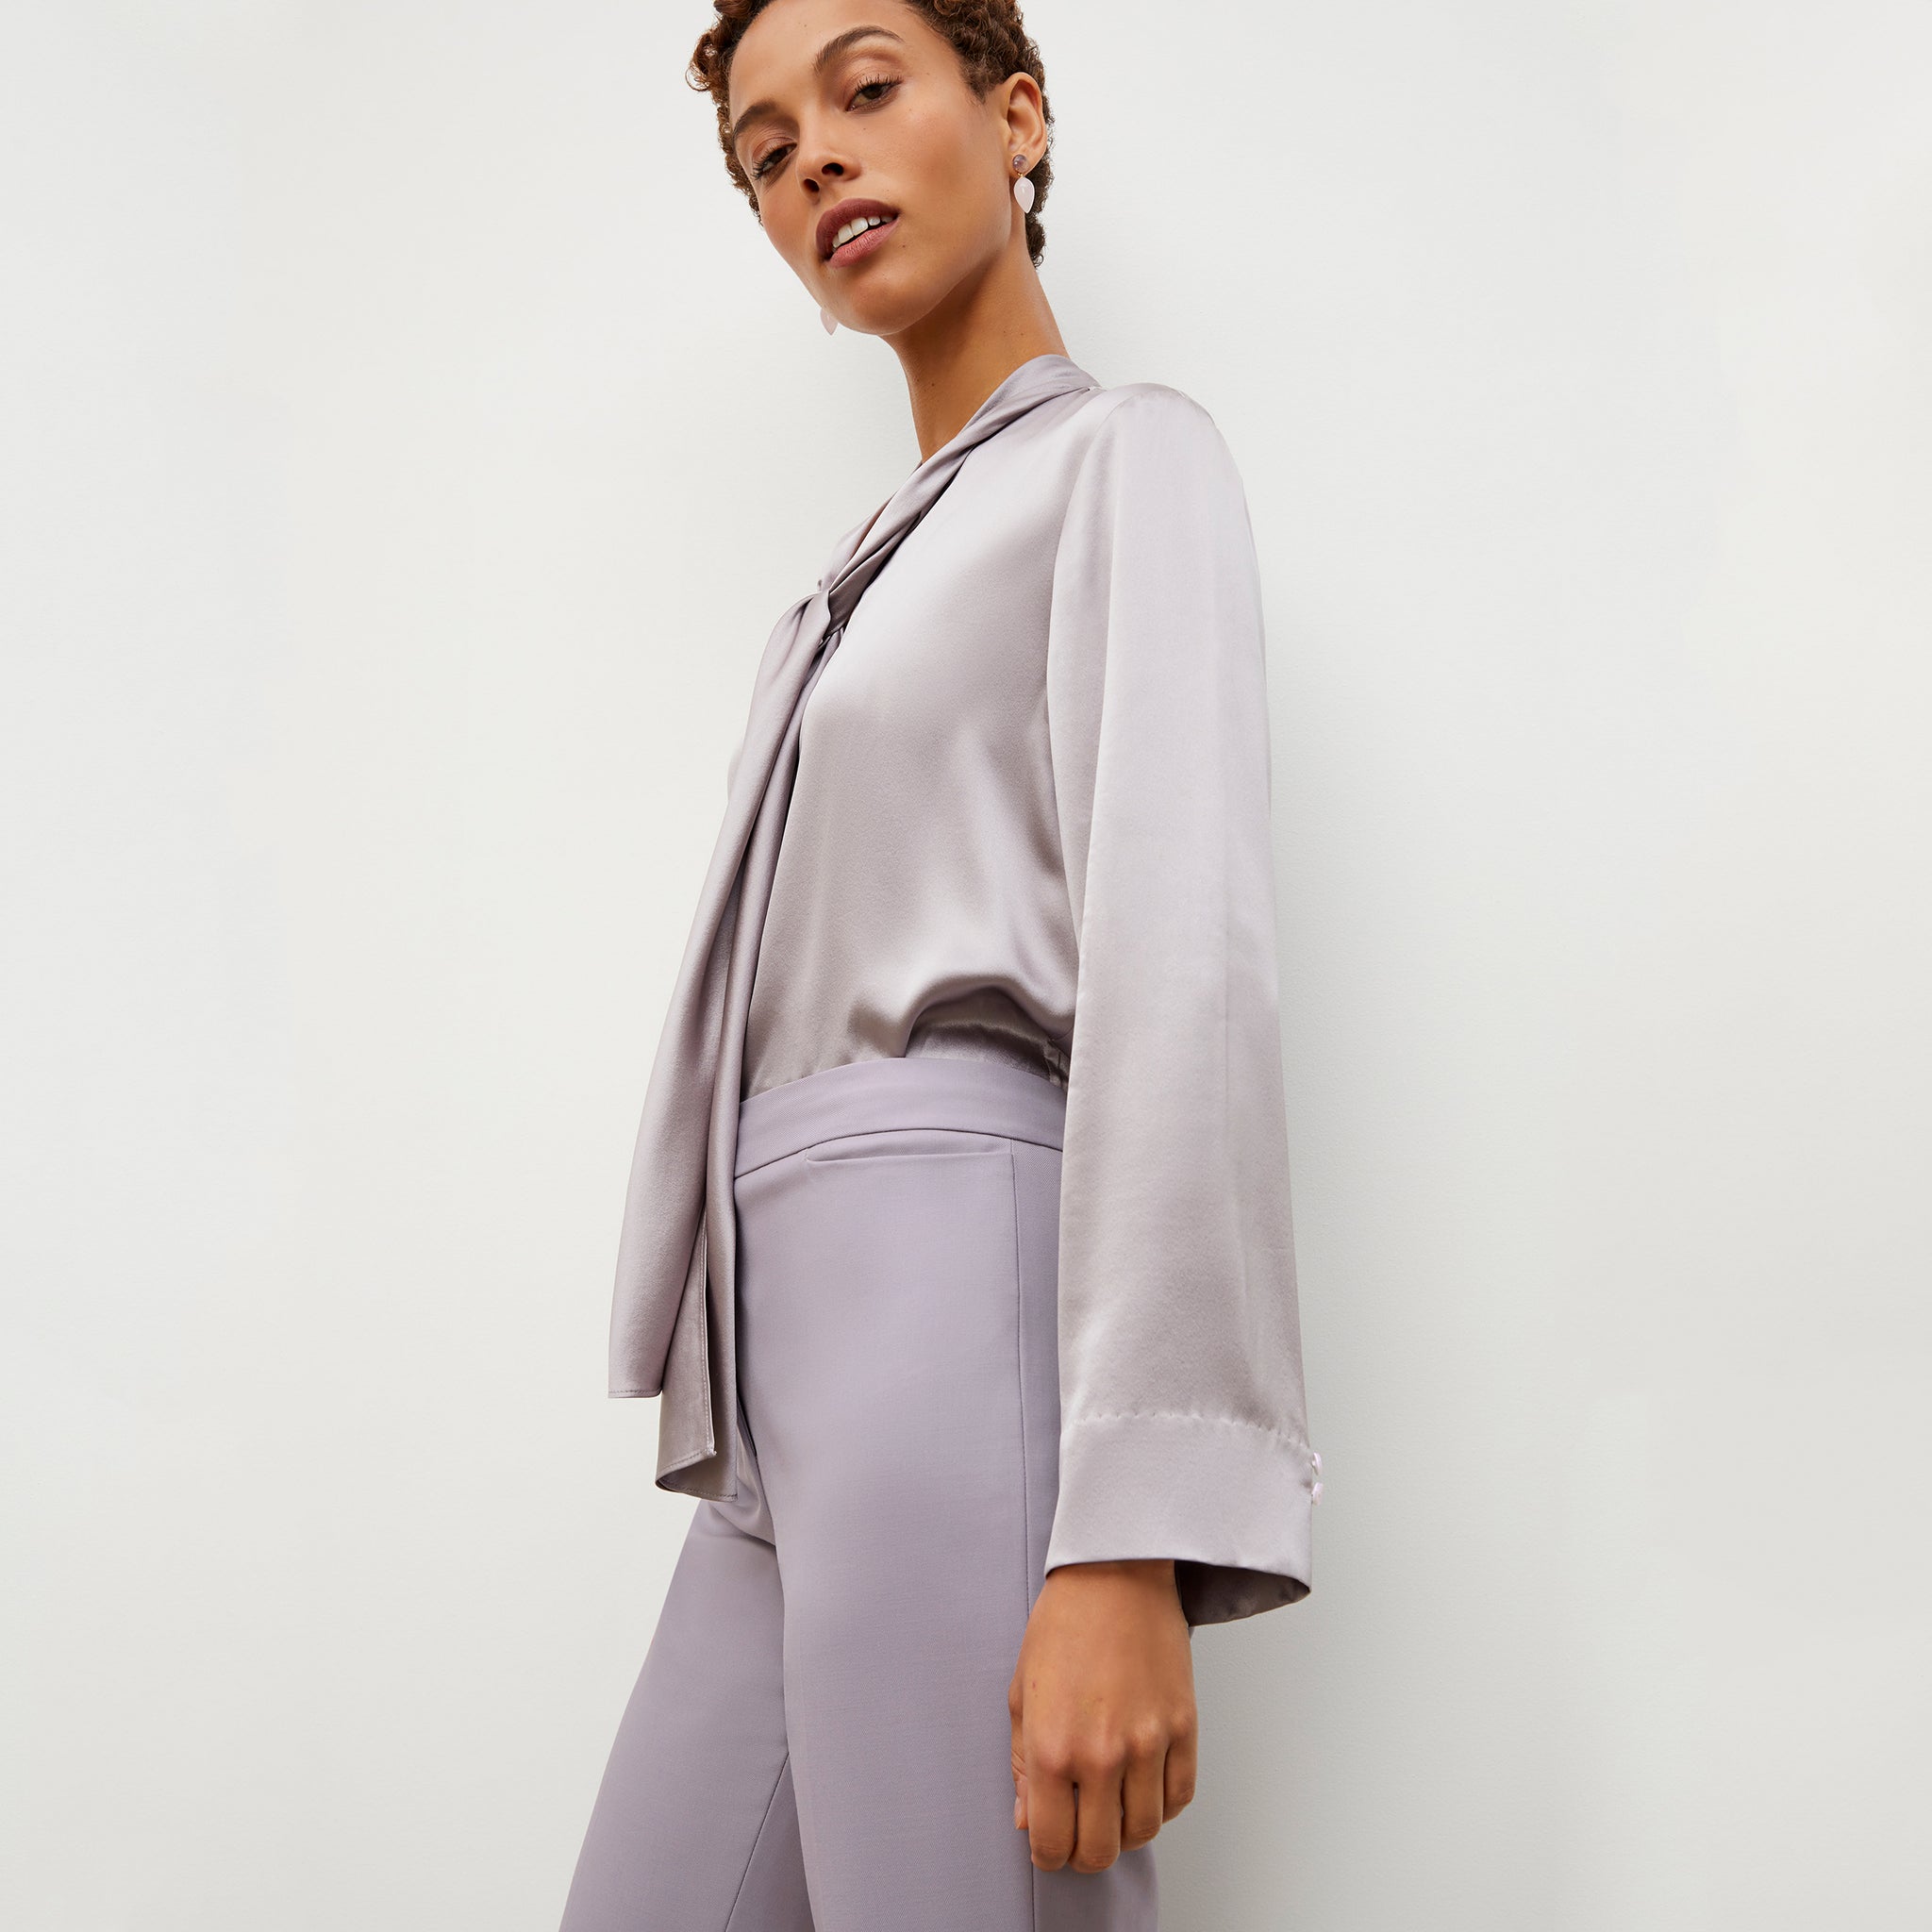 Side image of a woman wearing the Darcy Top - Washable Silk Charmeuse in Wisteria